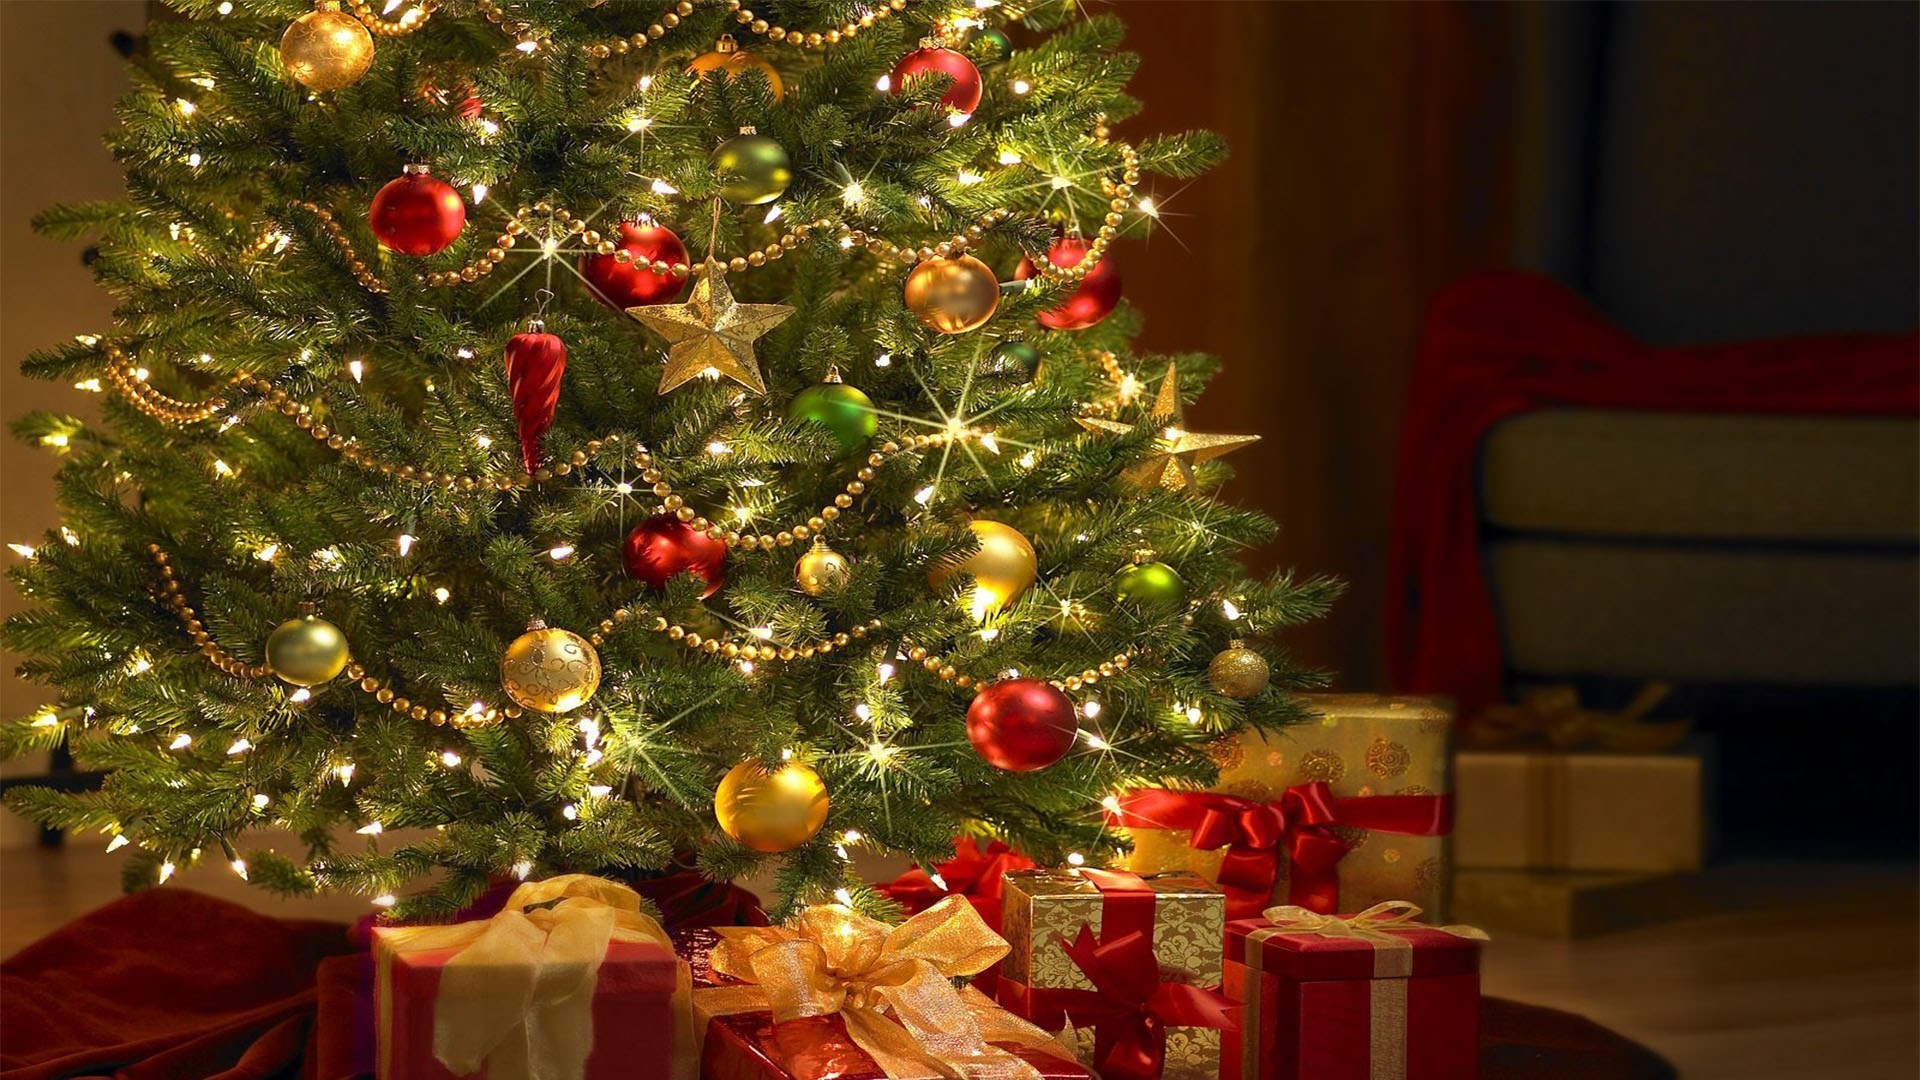 1920x1080 Xmas Tree Images & HD Wallpapers Free Download